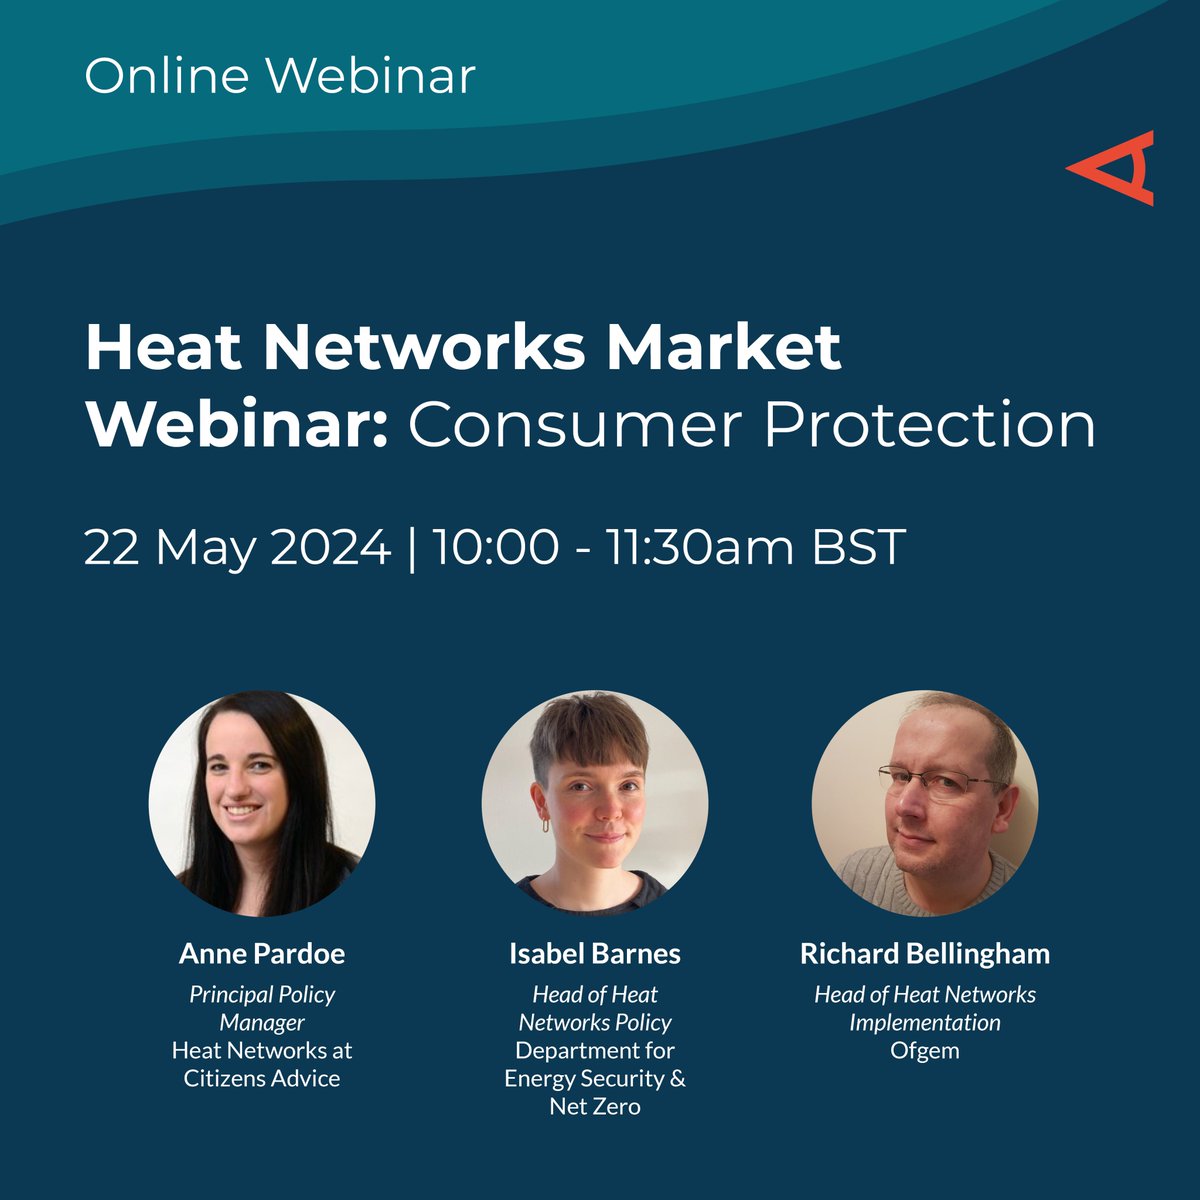 Our upcoming webinar with @HeatTrustUK will help you understand the progress towards heat network regulation and consumer protection. Join us on 22 May 2024 from 10:00am – 11:30am. Register here: teams.microsoft.com/registration/s…